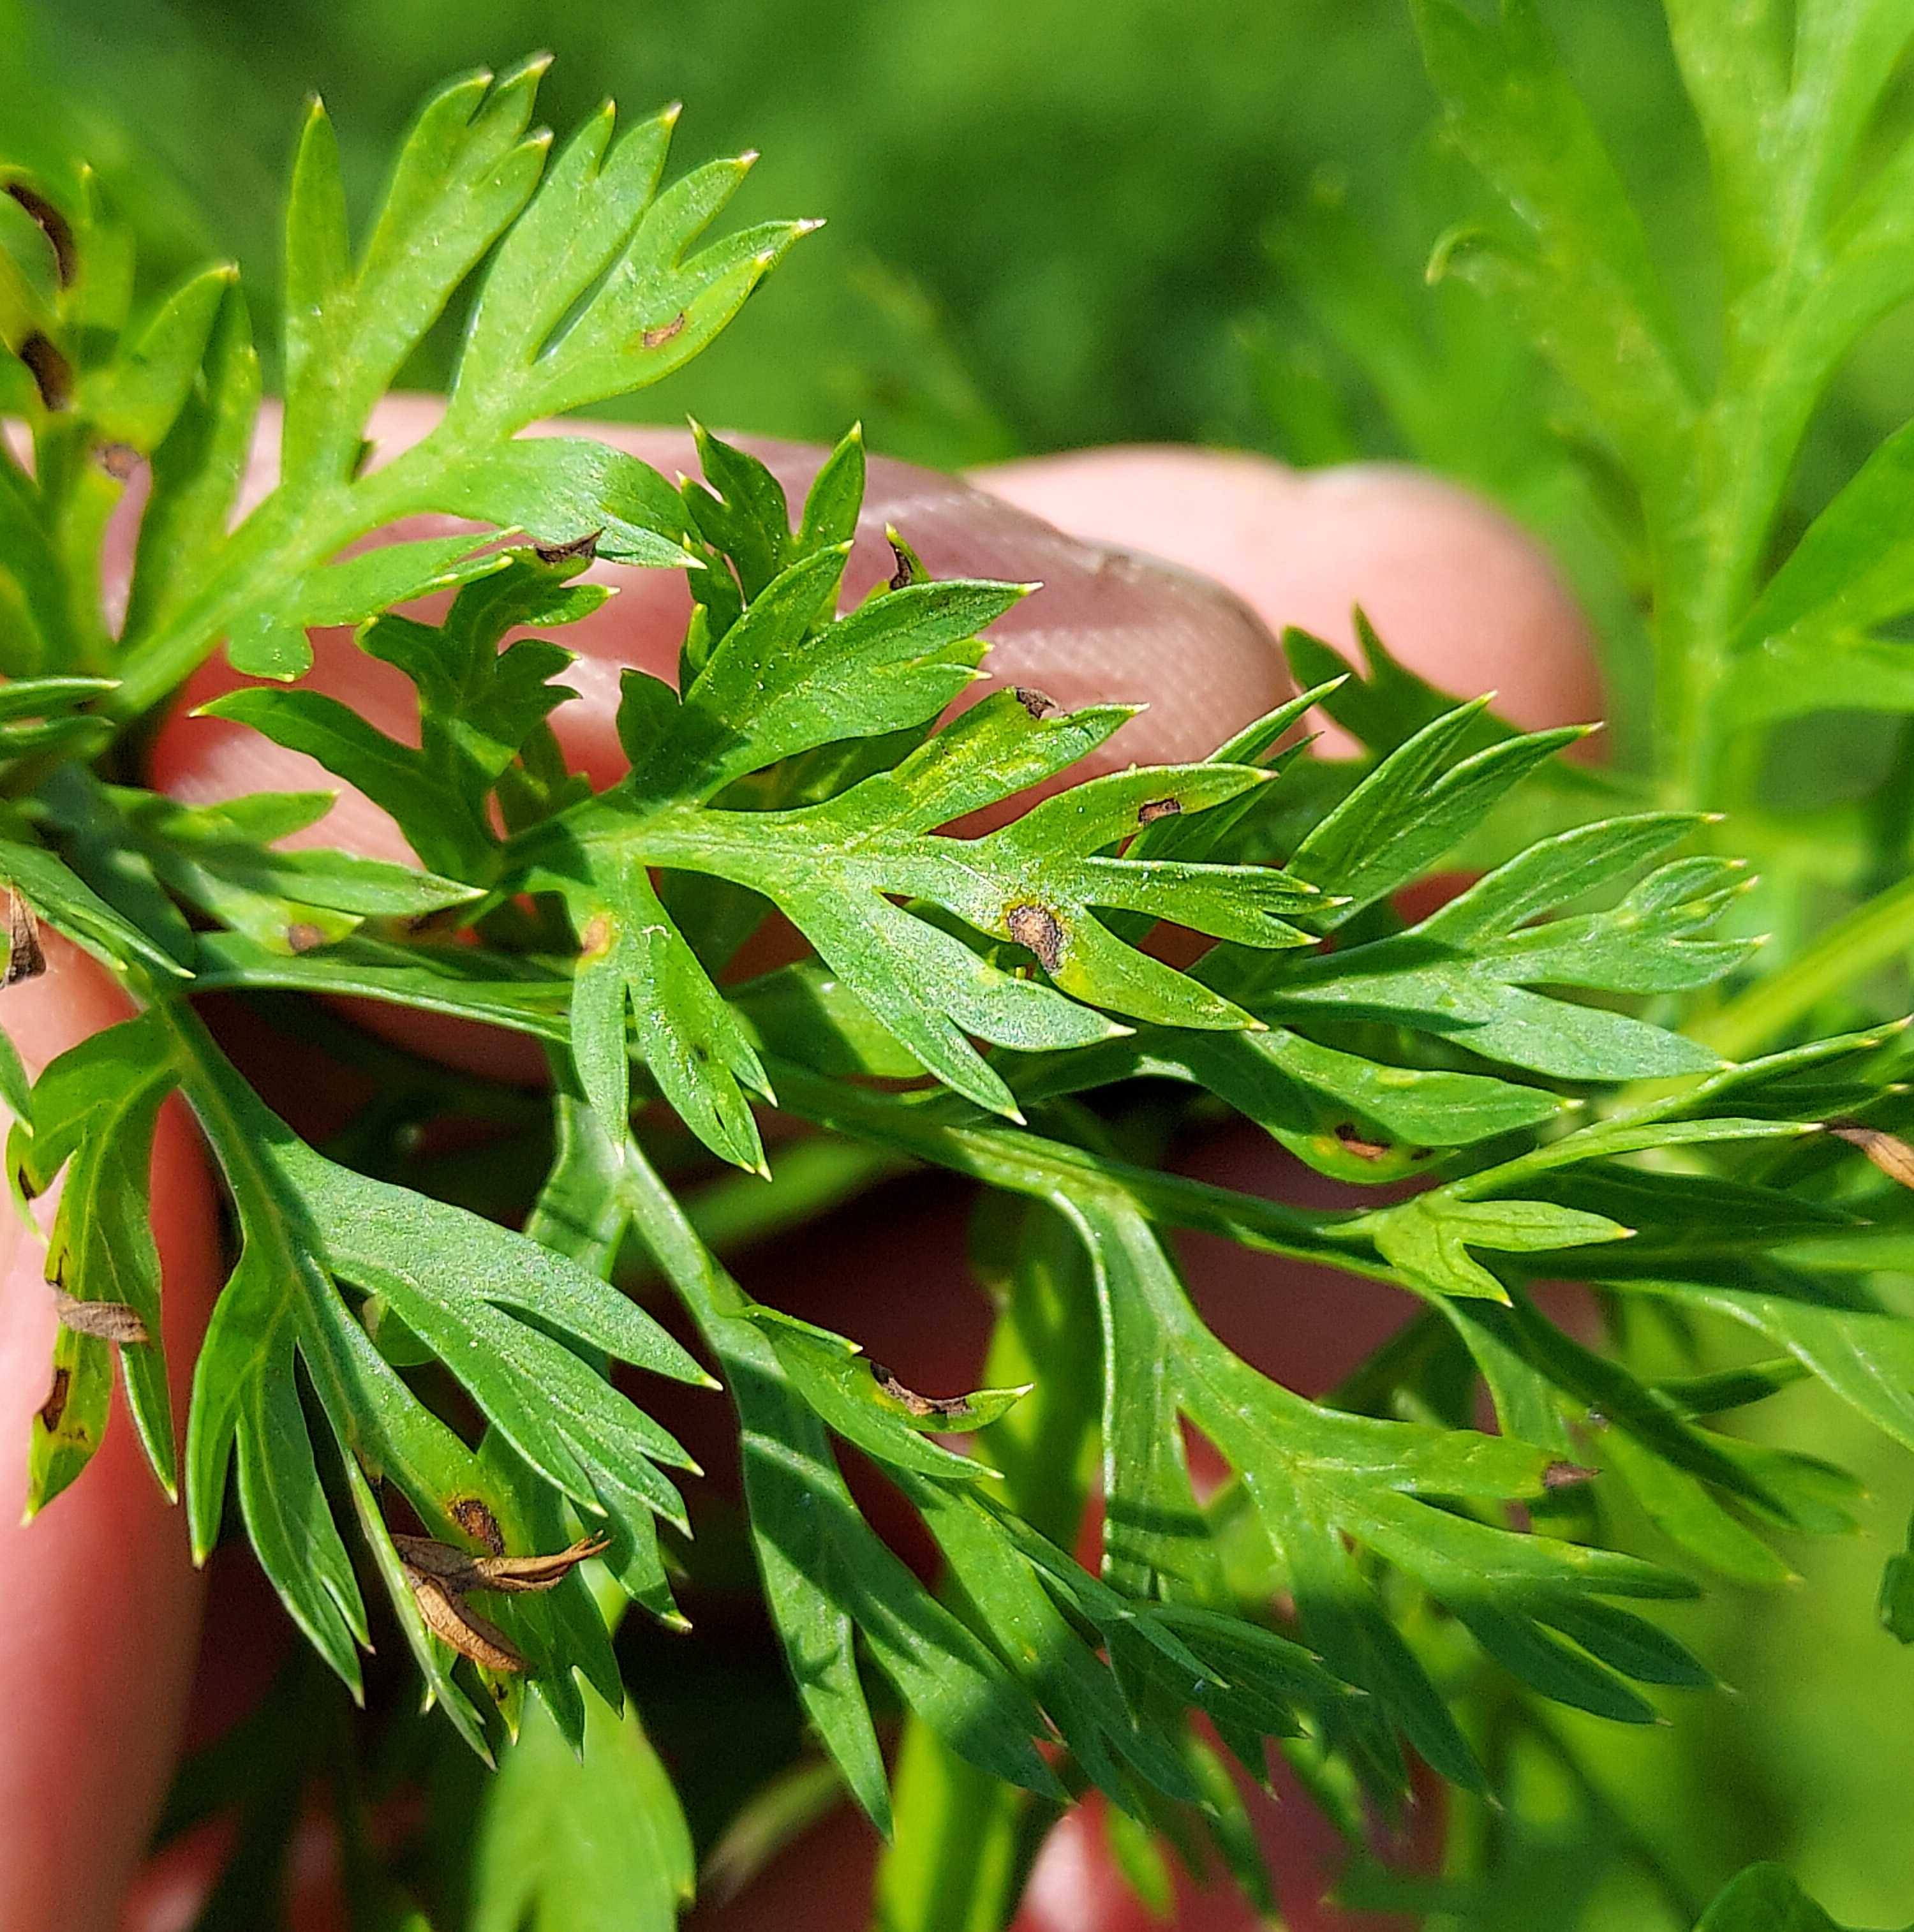 Leaf lesions on carrot